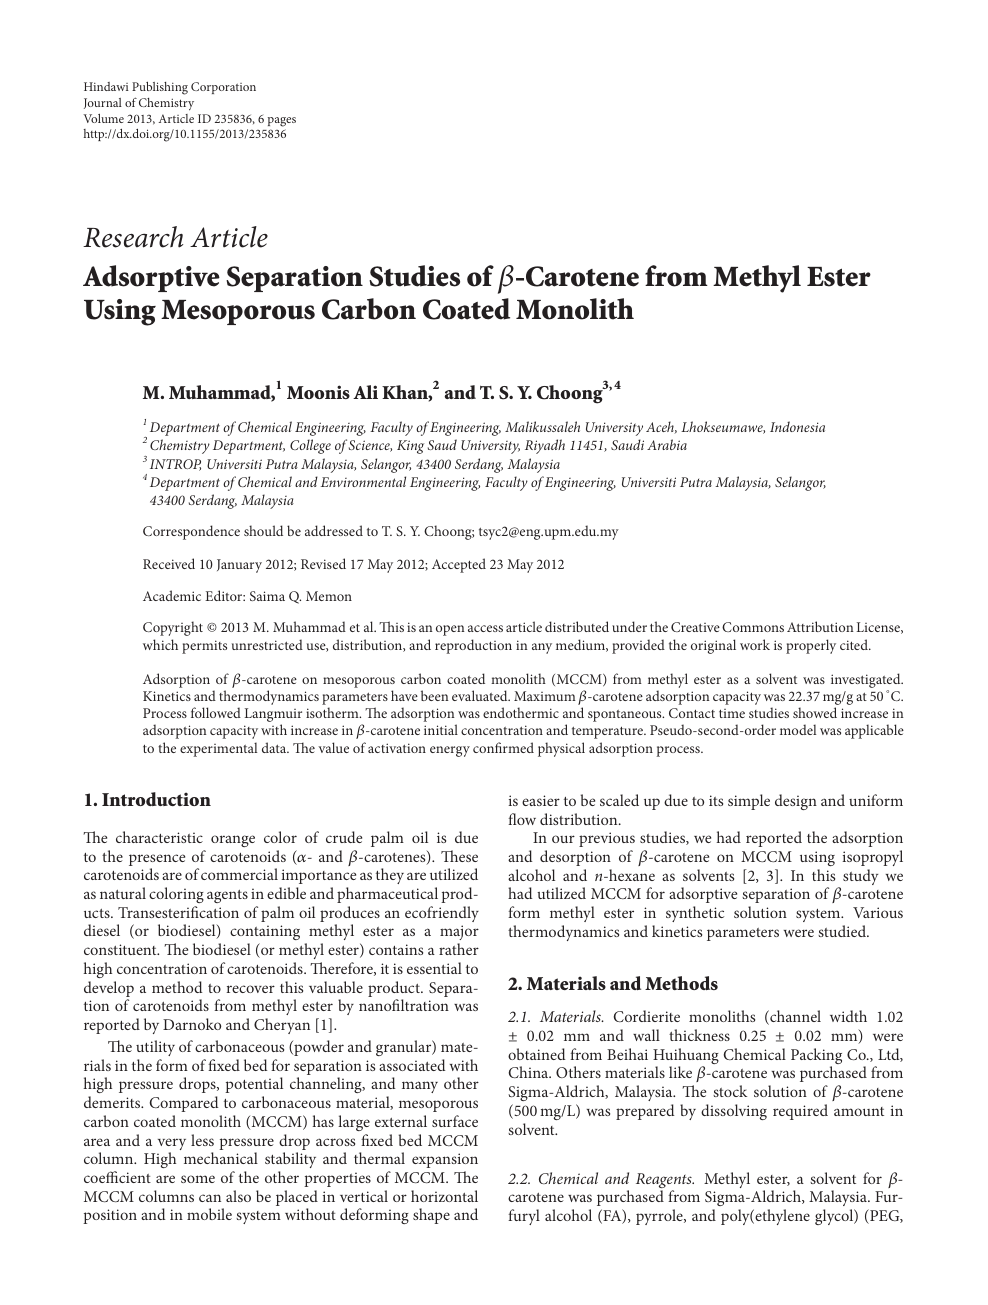 Adsorptive Separation Studies Of 𝜷 Carotene From Methyl Ester Using Mesoporous Carbon Coated Monolith Topic Of Research Paper In Chemical Engineering Download Scholarly Article Pdf And Read For Free On Cyberleninka Open